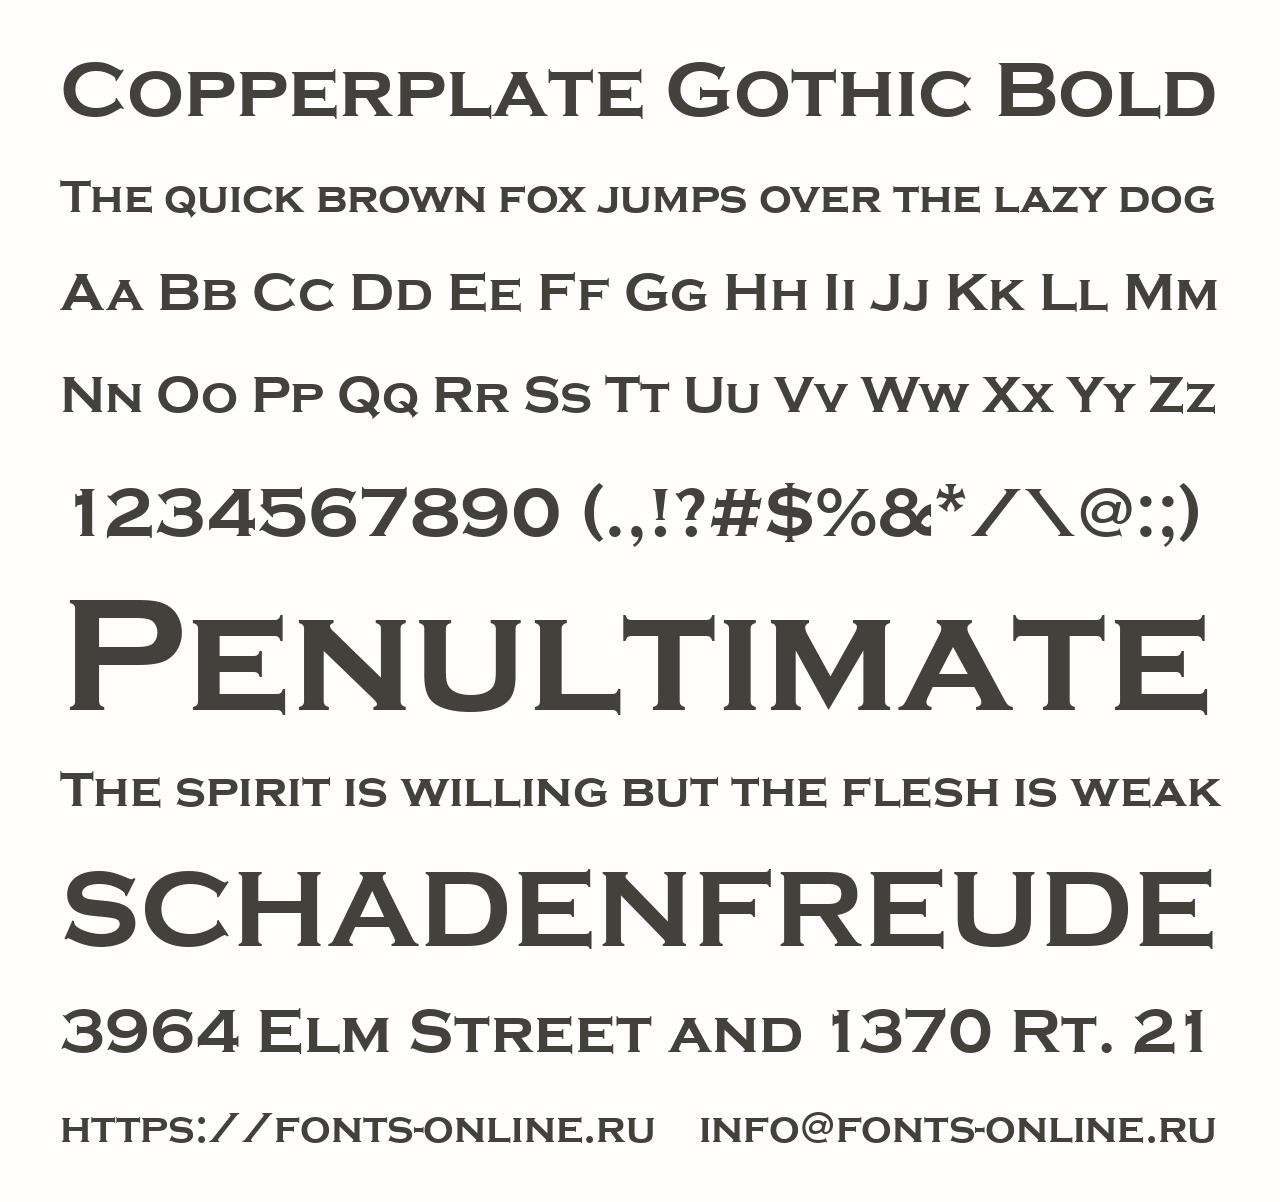 Copperplate Gothic Bold.